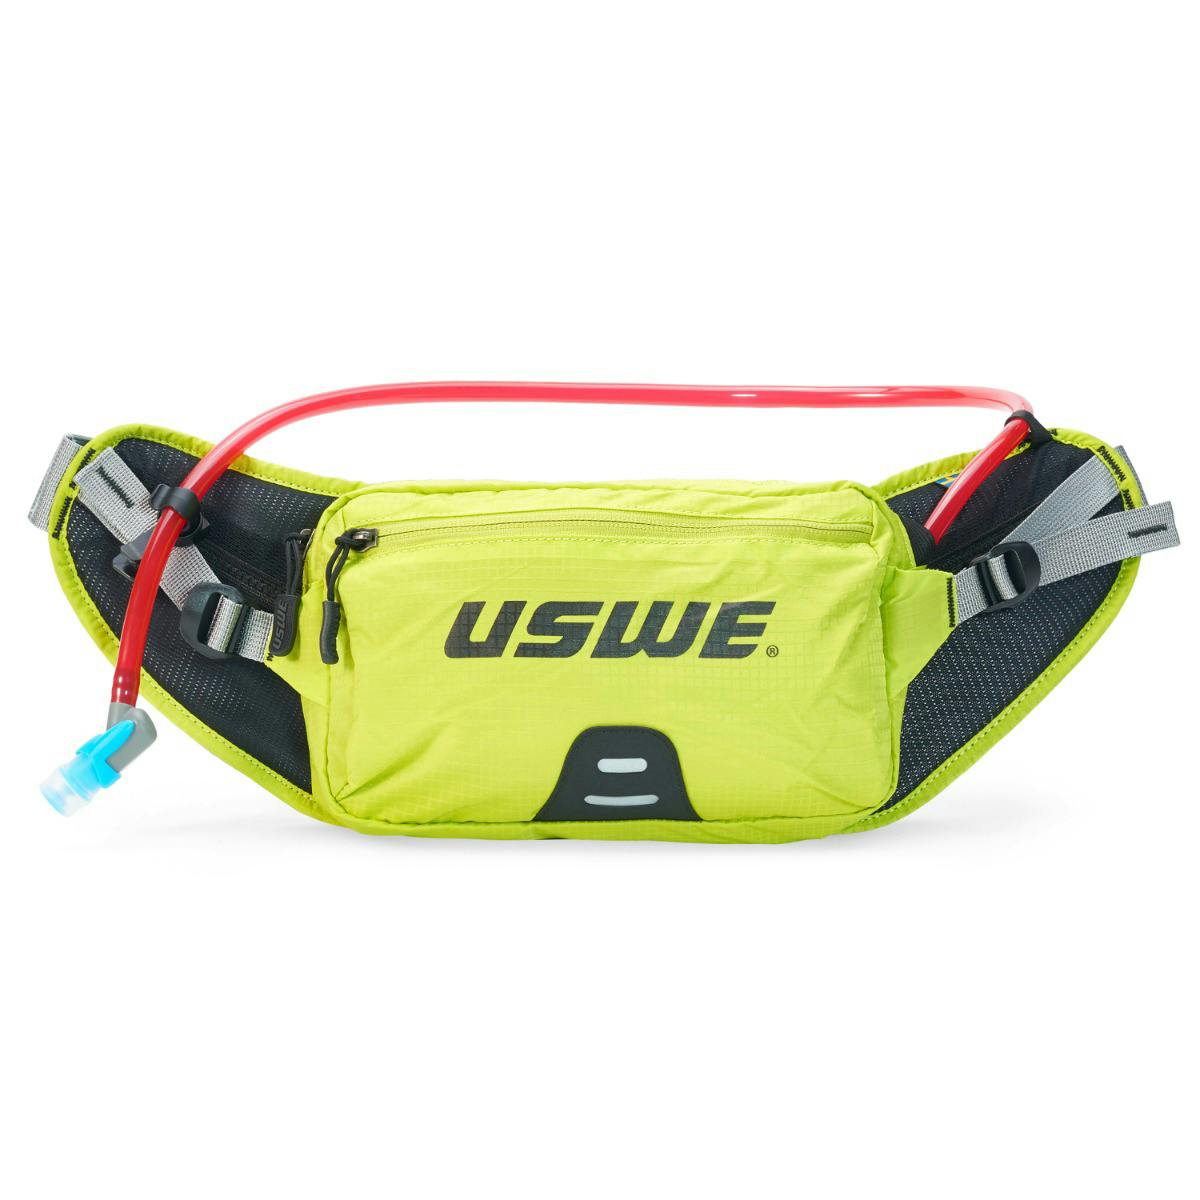 USWE ZULO 2 Plus Hydration Hip Pack - Yellow